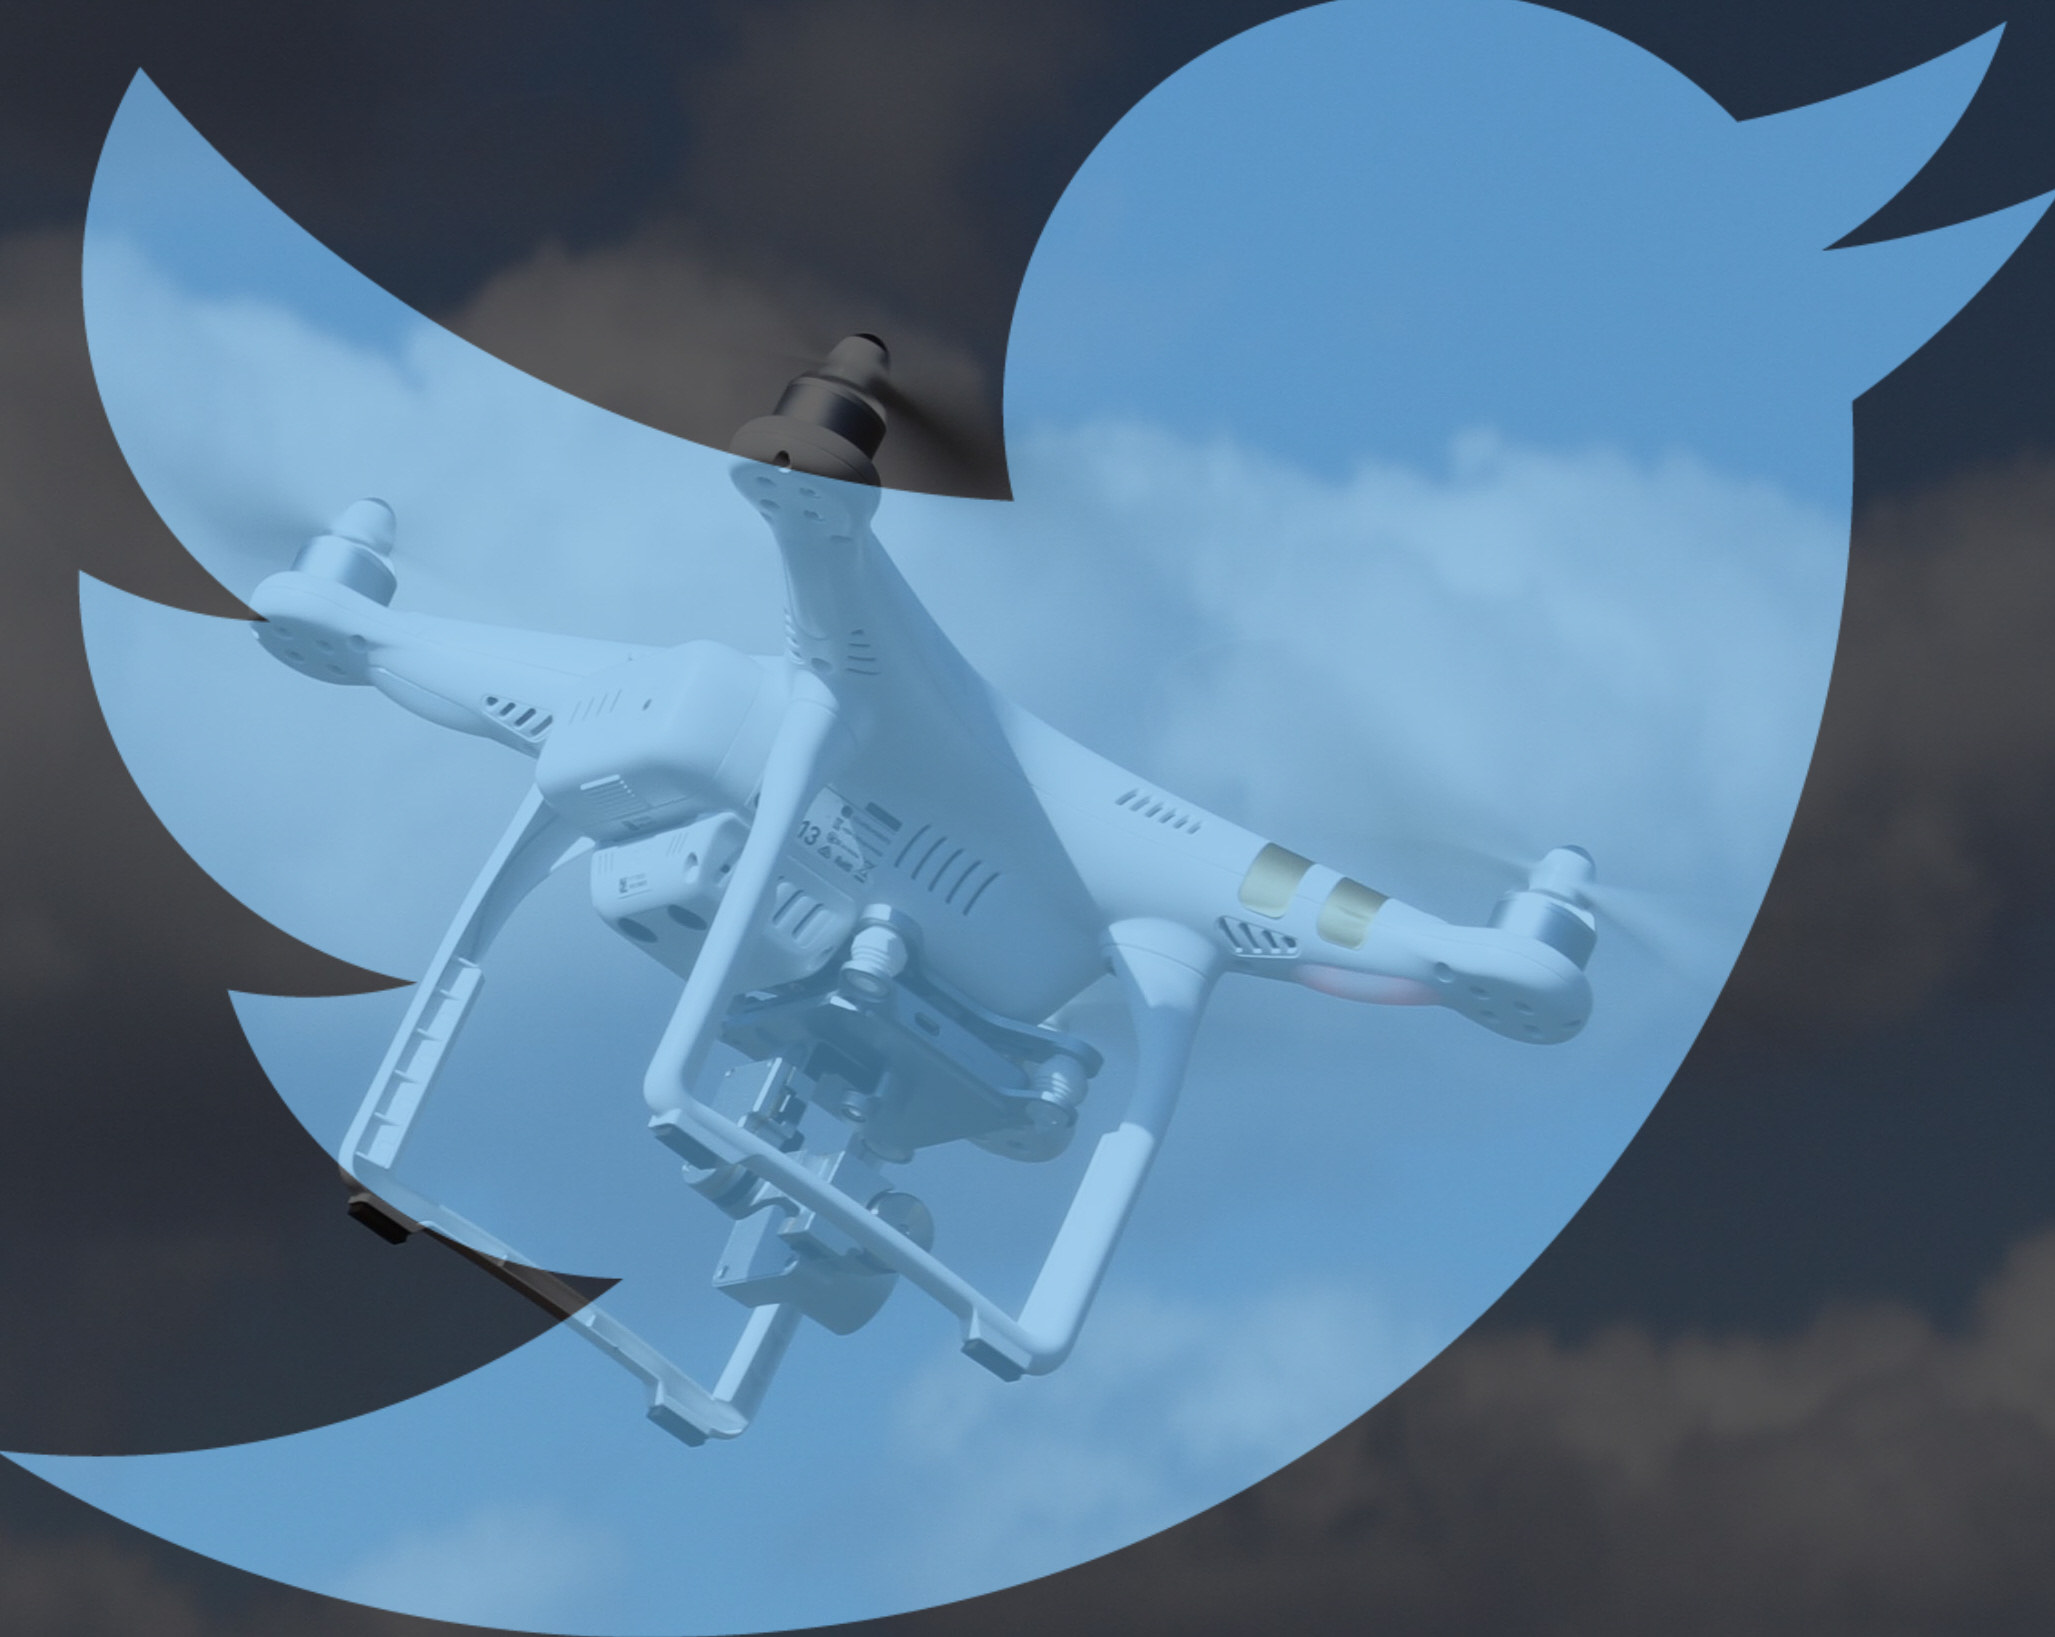 Twitter Just Patented Tweet-Piloted Drones